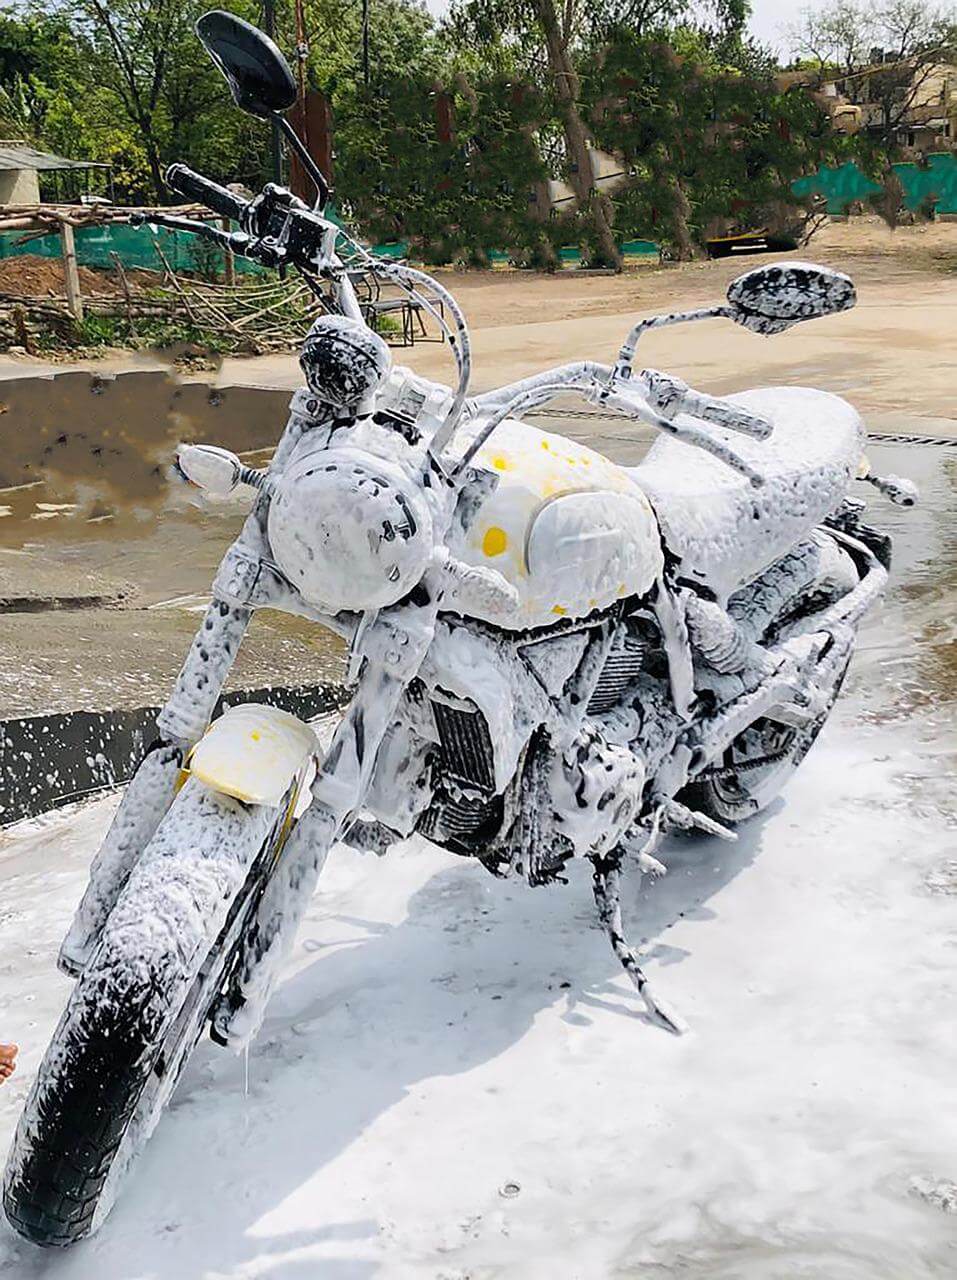 Motorcycle being washed with sudsy soap